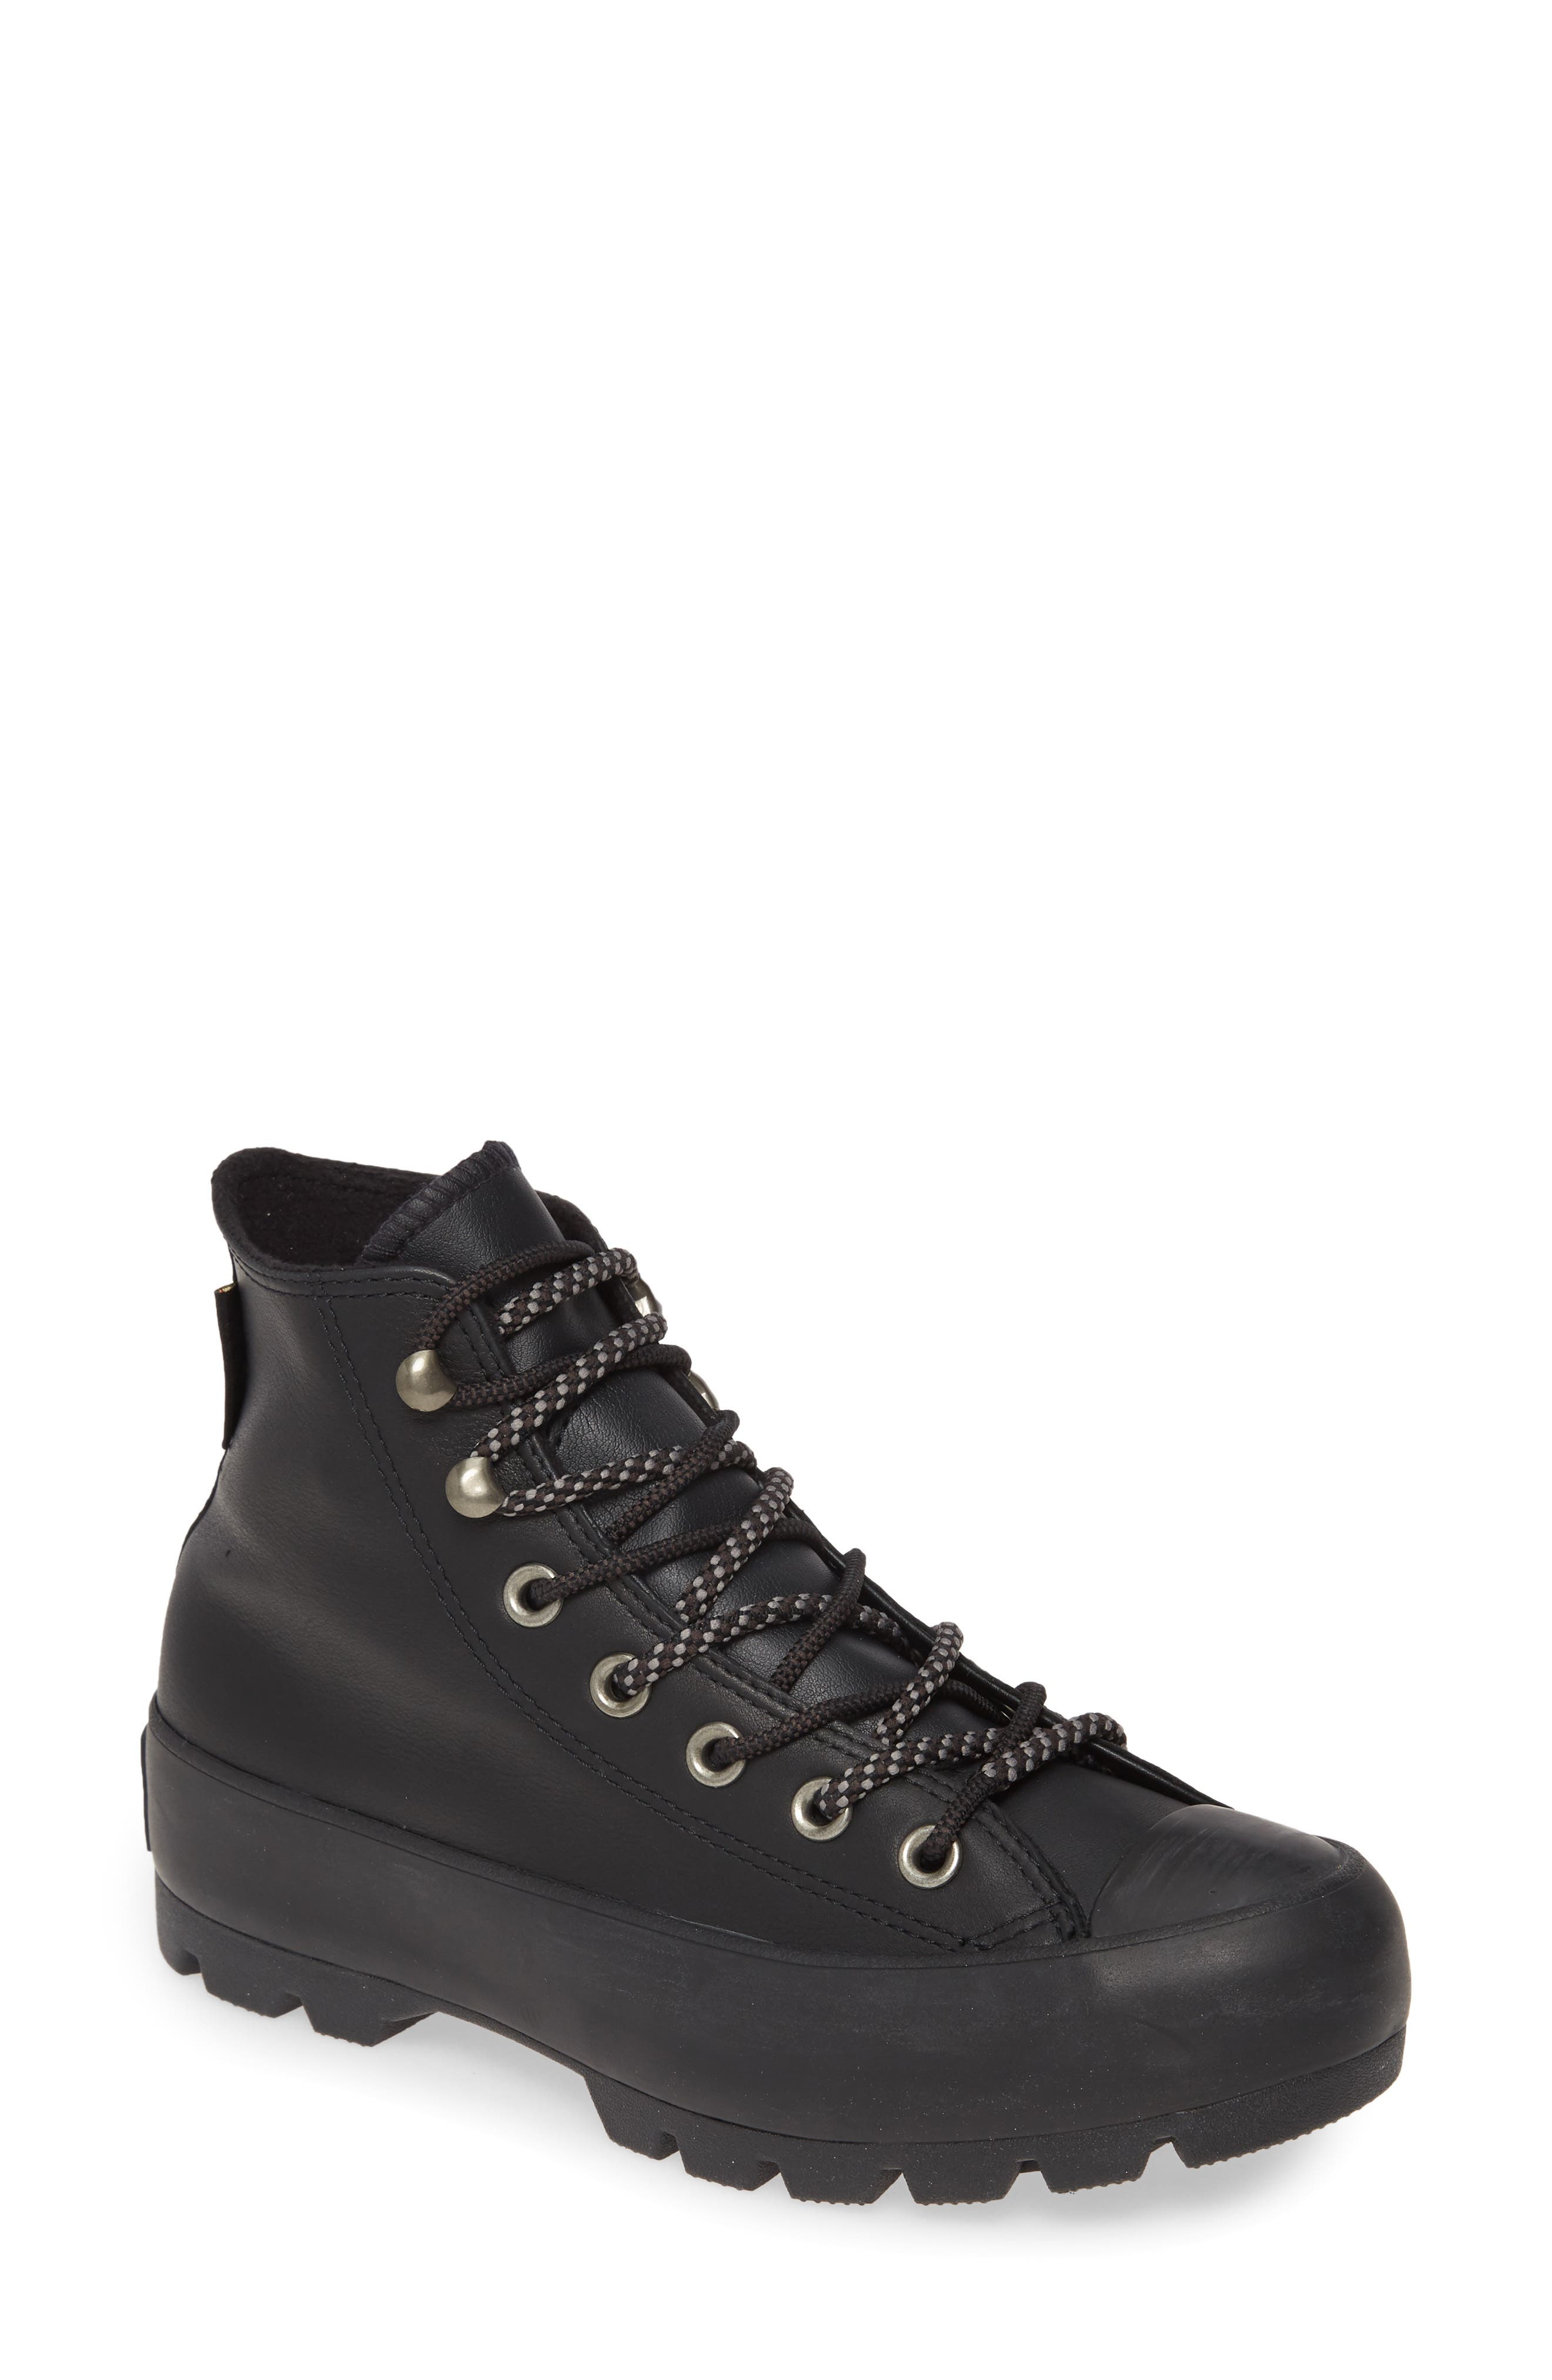 converse ankle boots